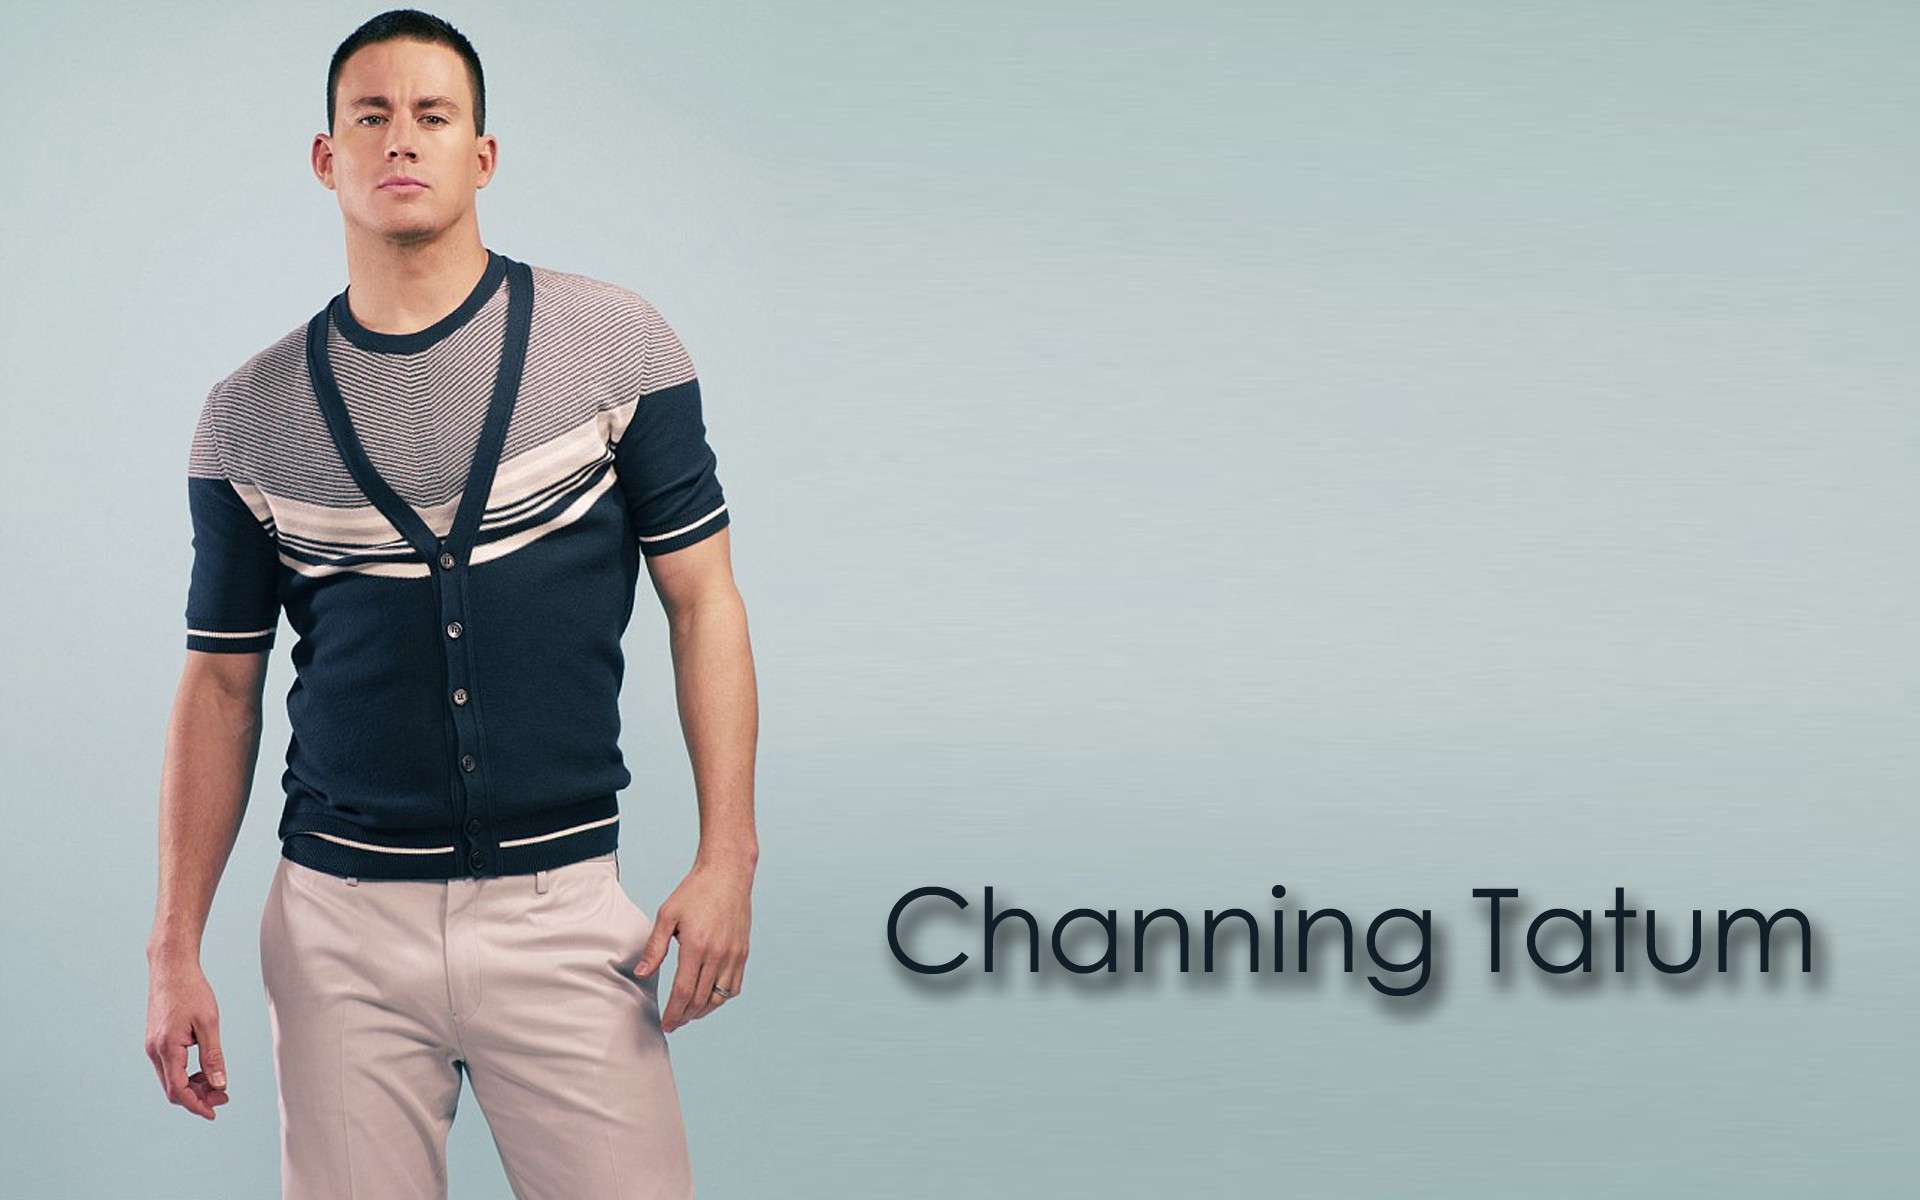 Best 43+ Channing Tatum Wallpapers on HipWallpapers.